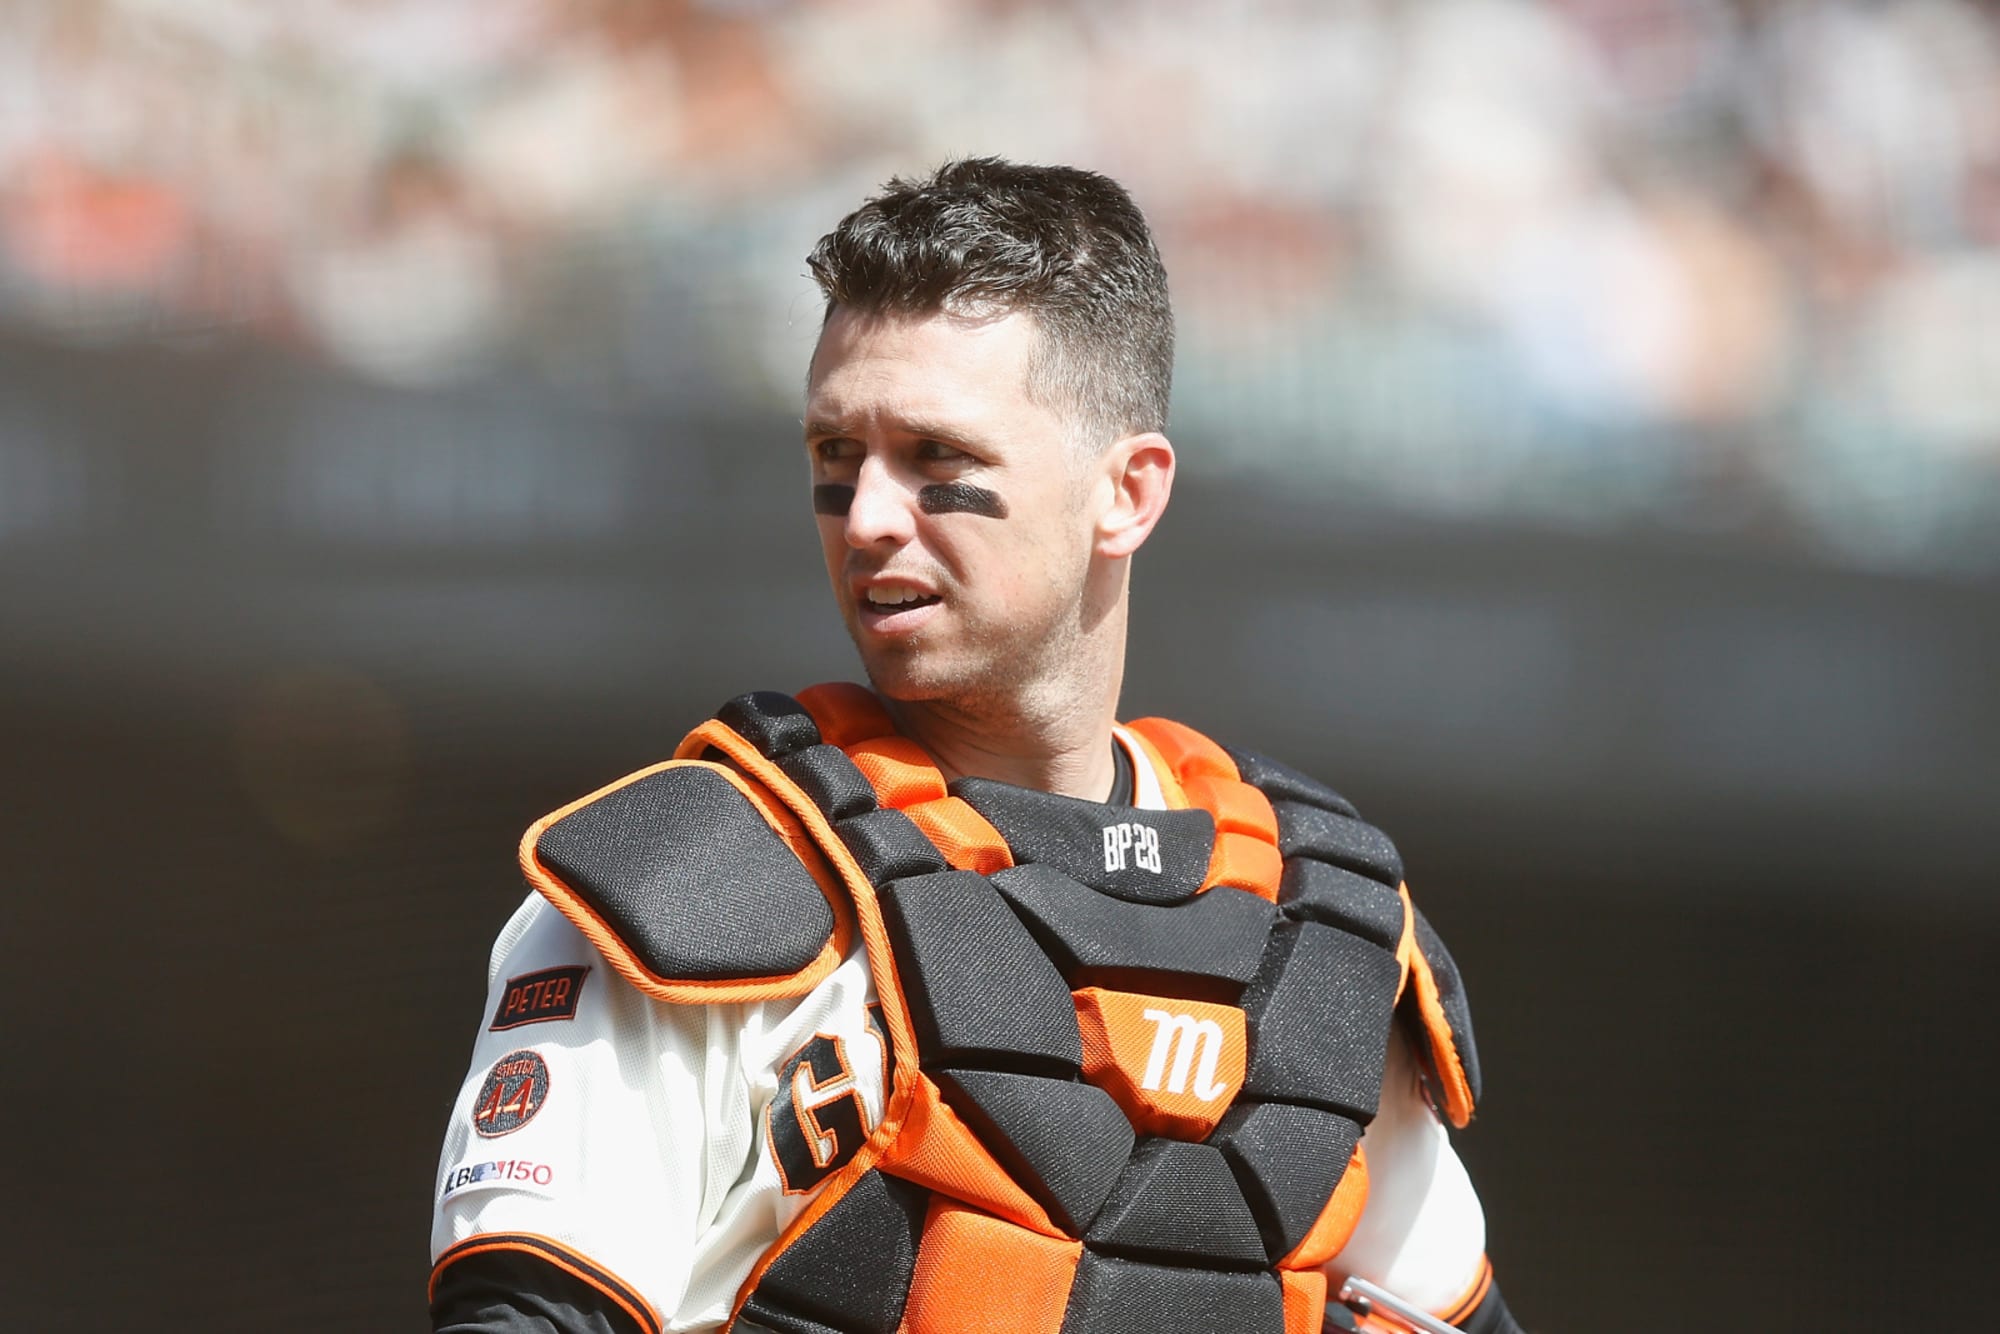 Giants' Buster Posey opts out of MLB season after he and his wife